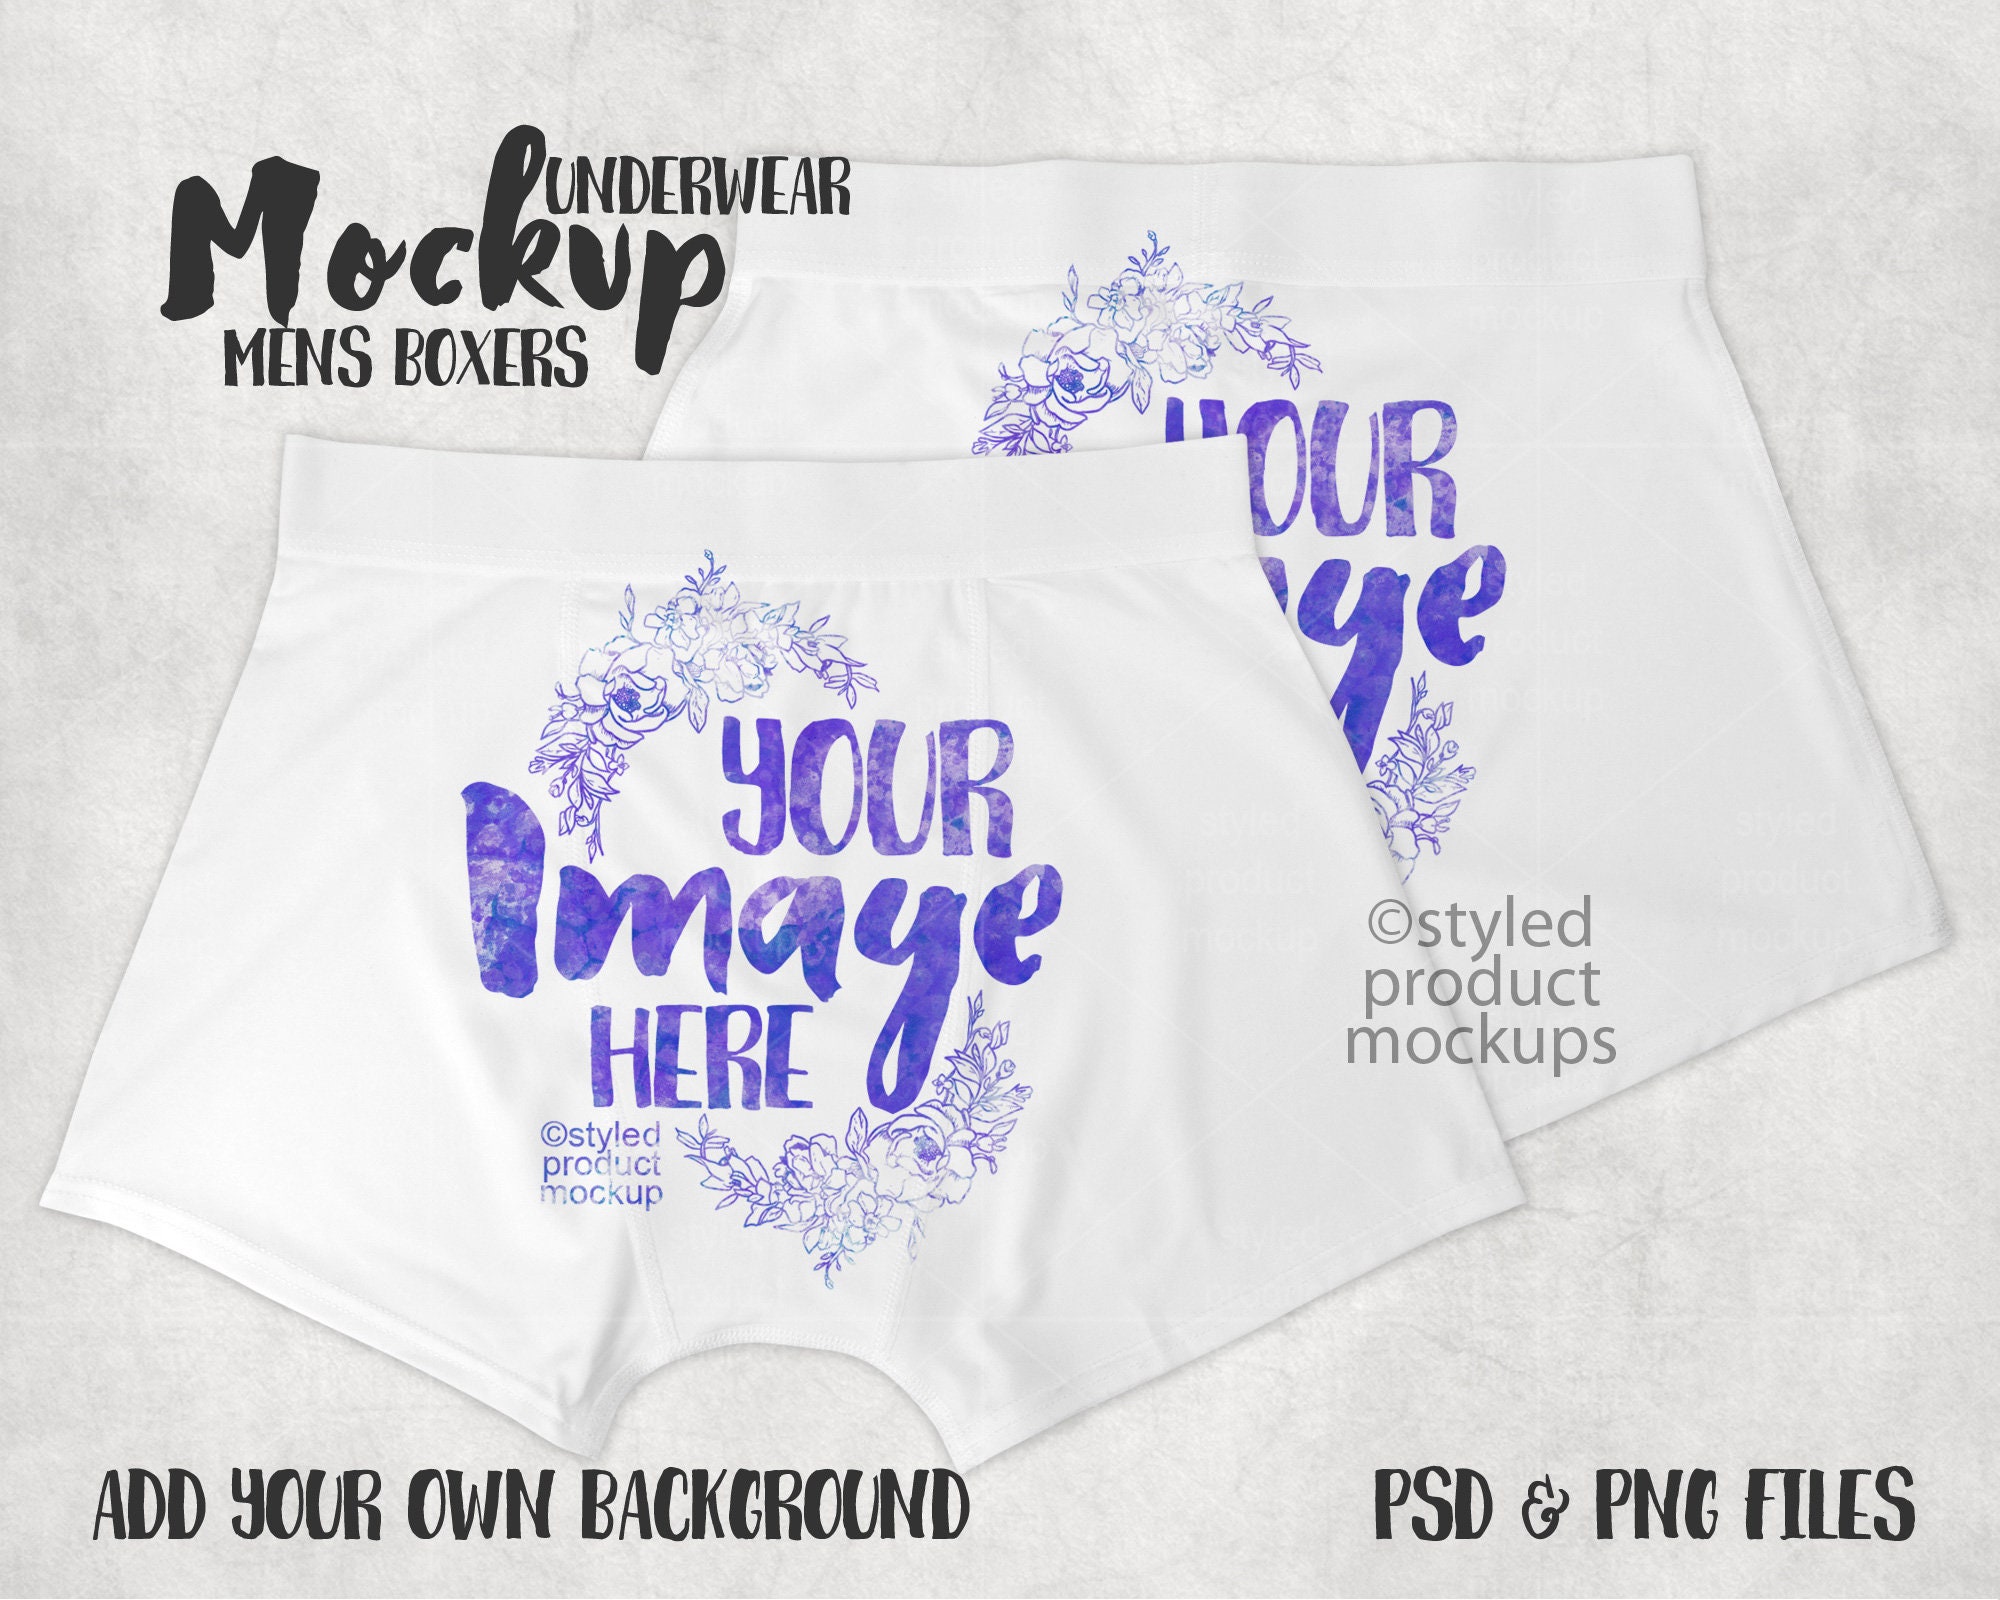 Women's Panties Mockup - Free Download Images High Quality PNG